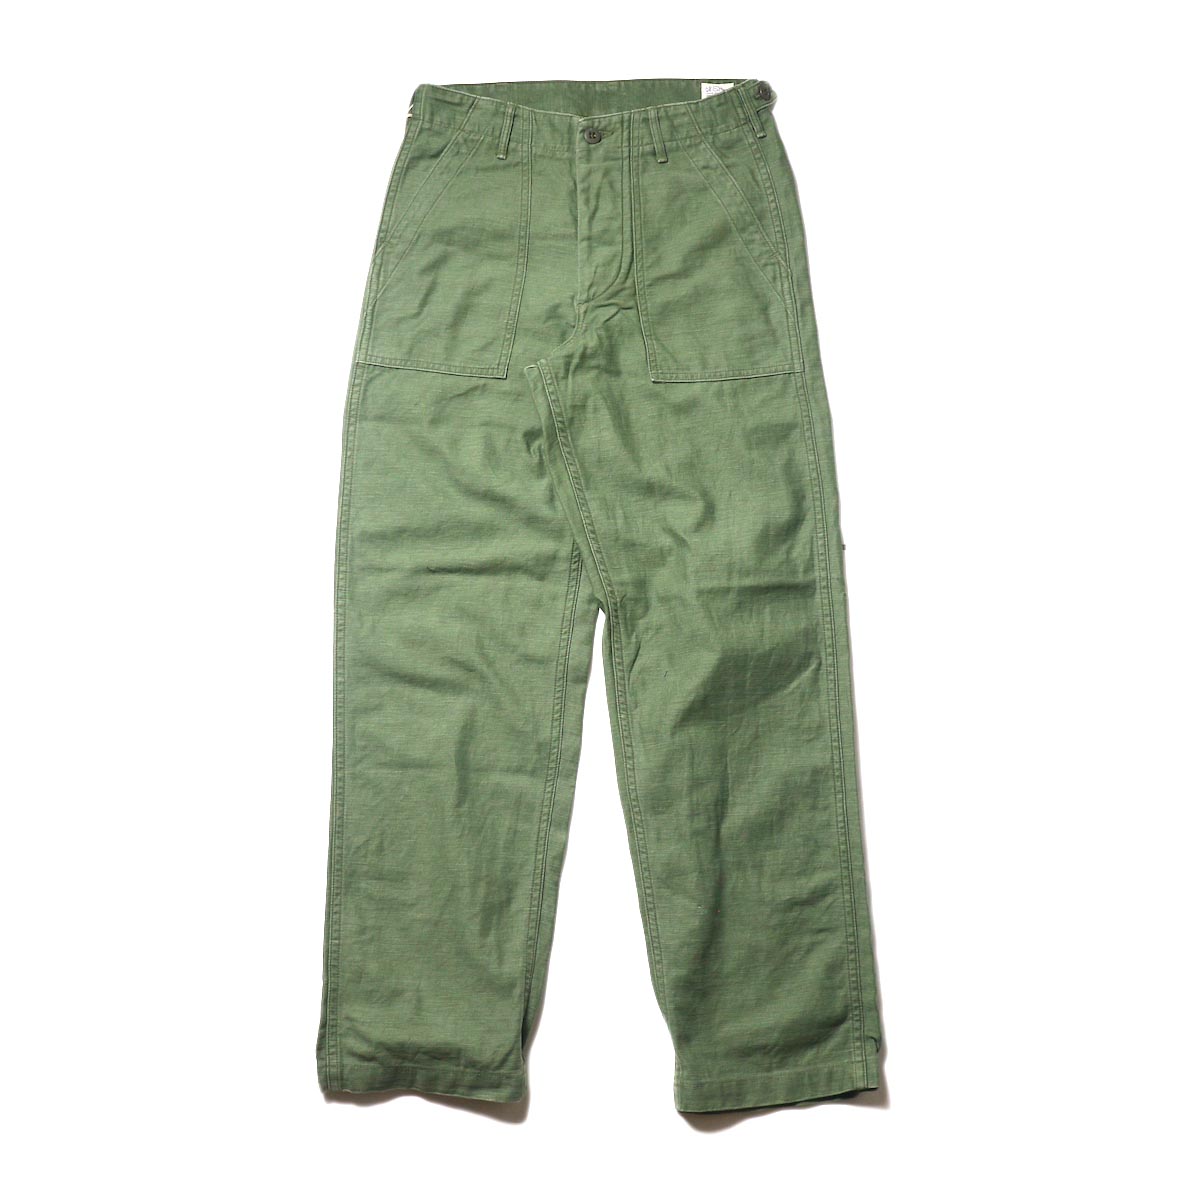 orSlow / US ARMY FATIGUE PANTS (Used Green)